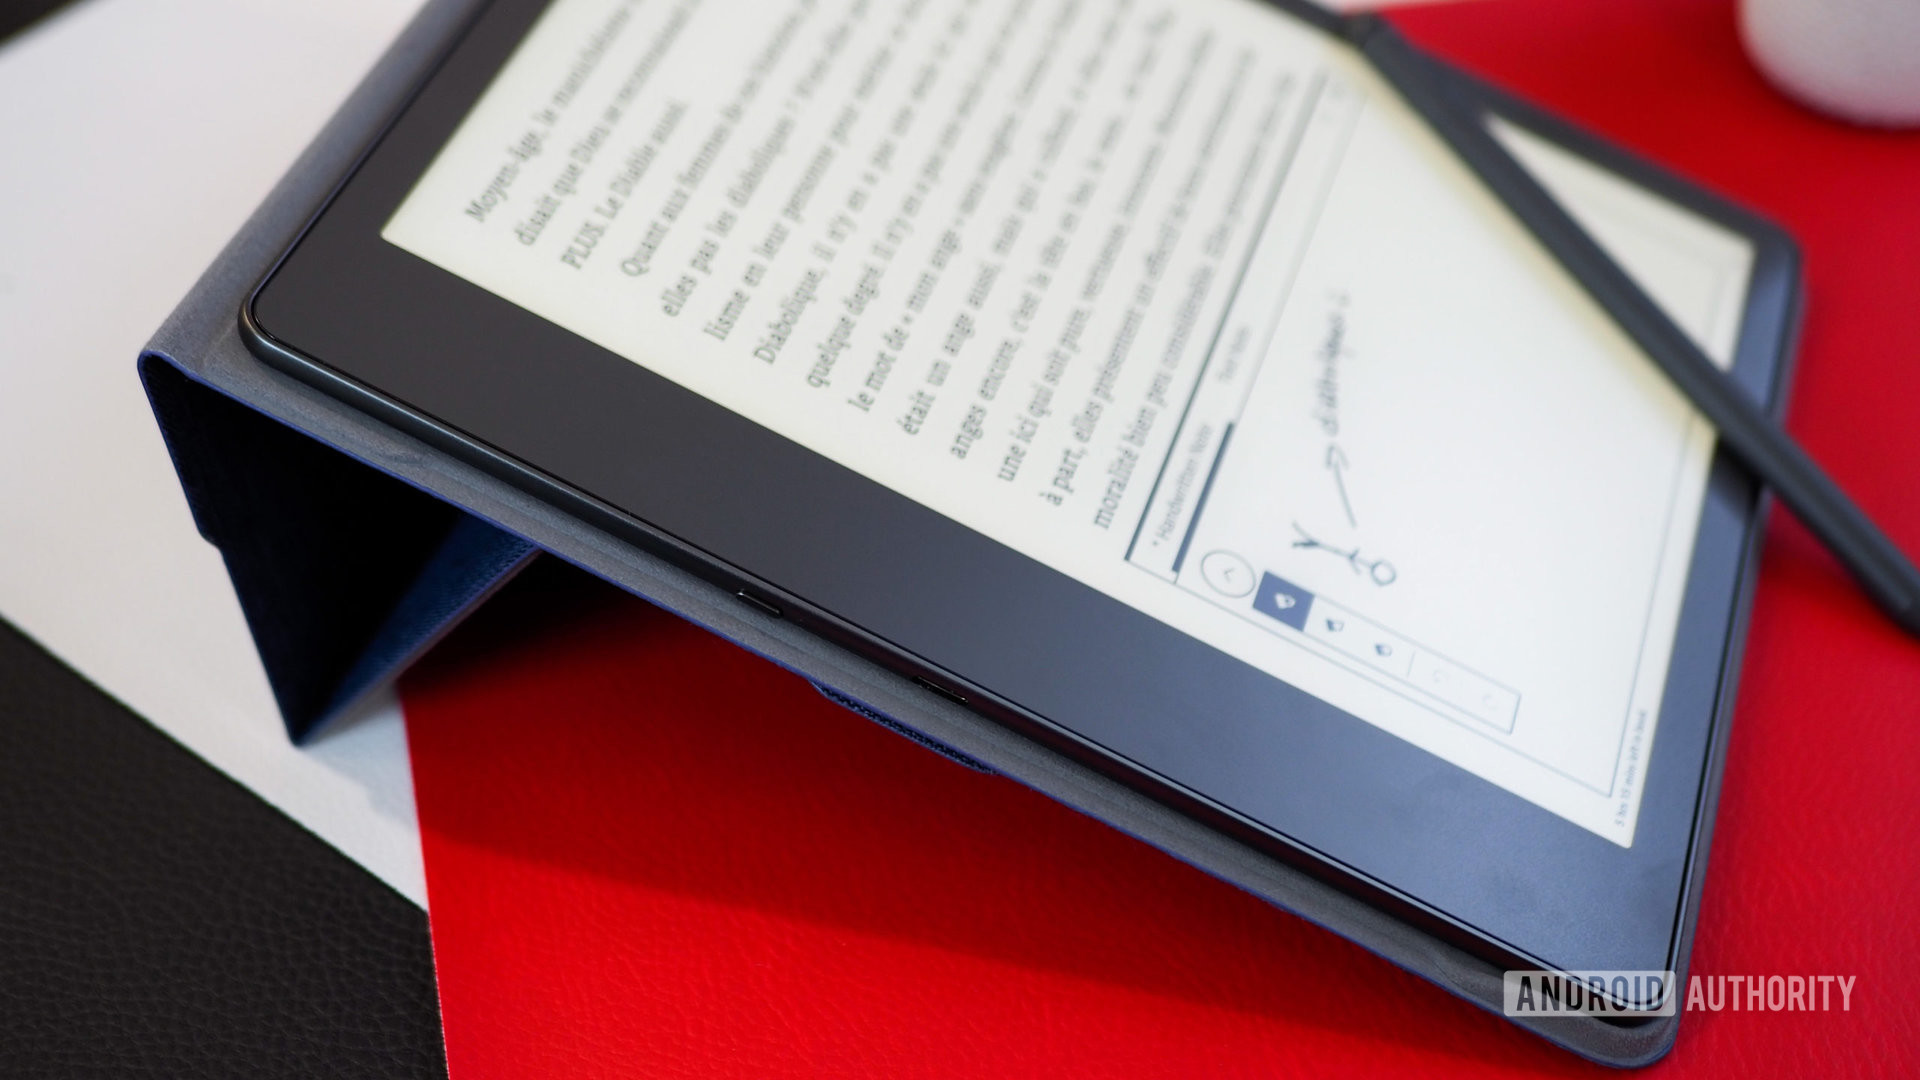 Amazon Kindle Scribe's handwritten sticky note, seen from the side, with the reader propped on the official Amazon folio cover